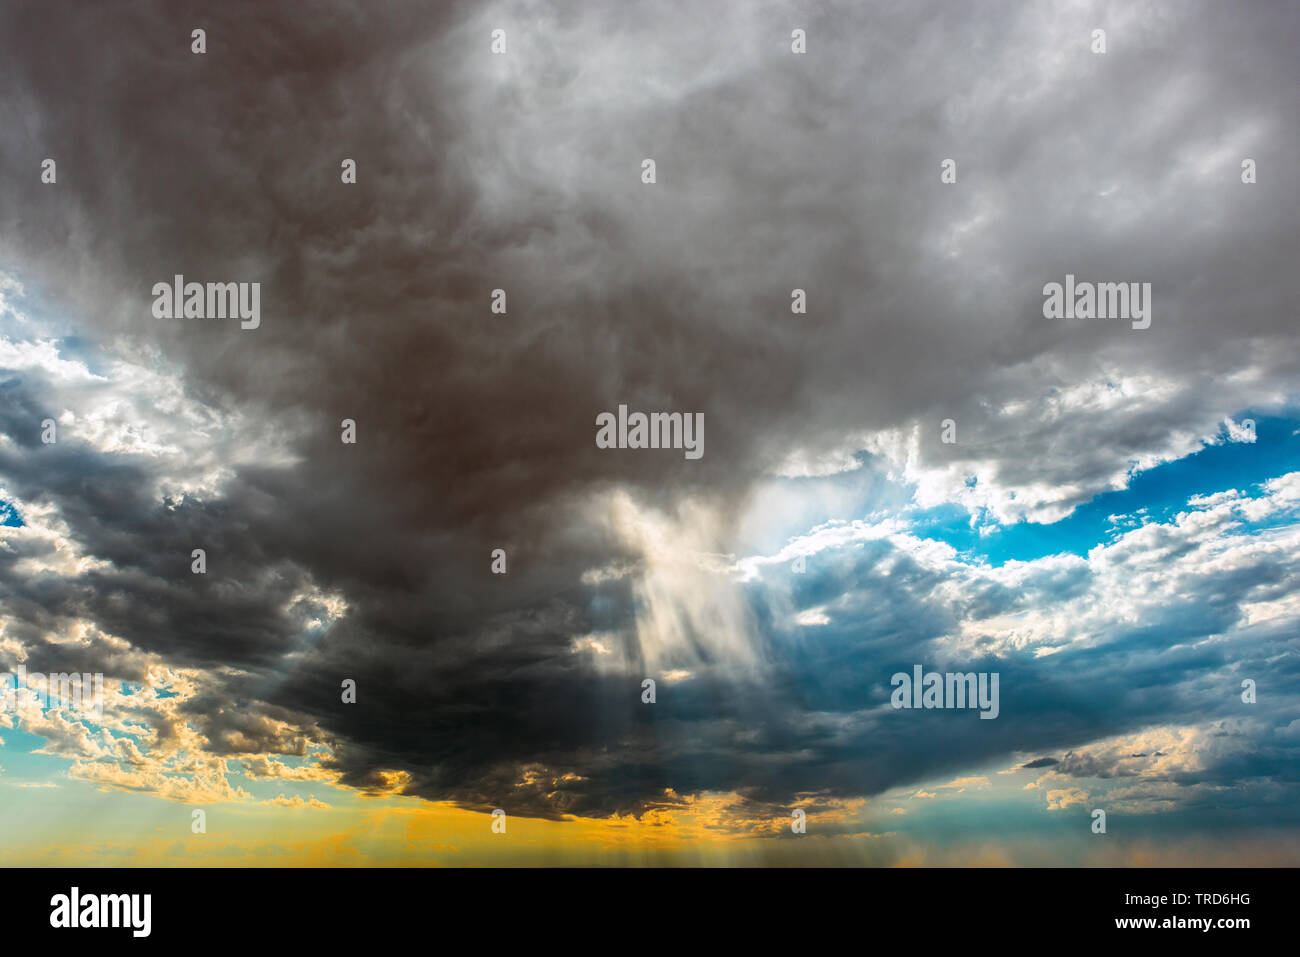 Cloudscape with colorful sky and sunbeam with light rays at sunset. Concept of God, heaven, wisdom, religion and spirituality. Stock Photo